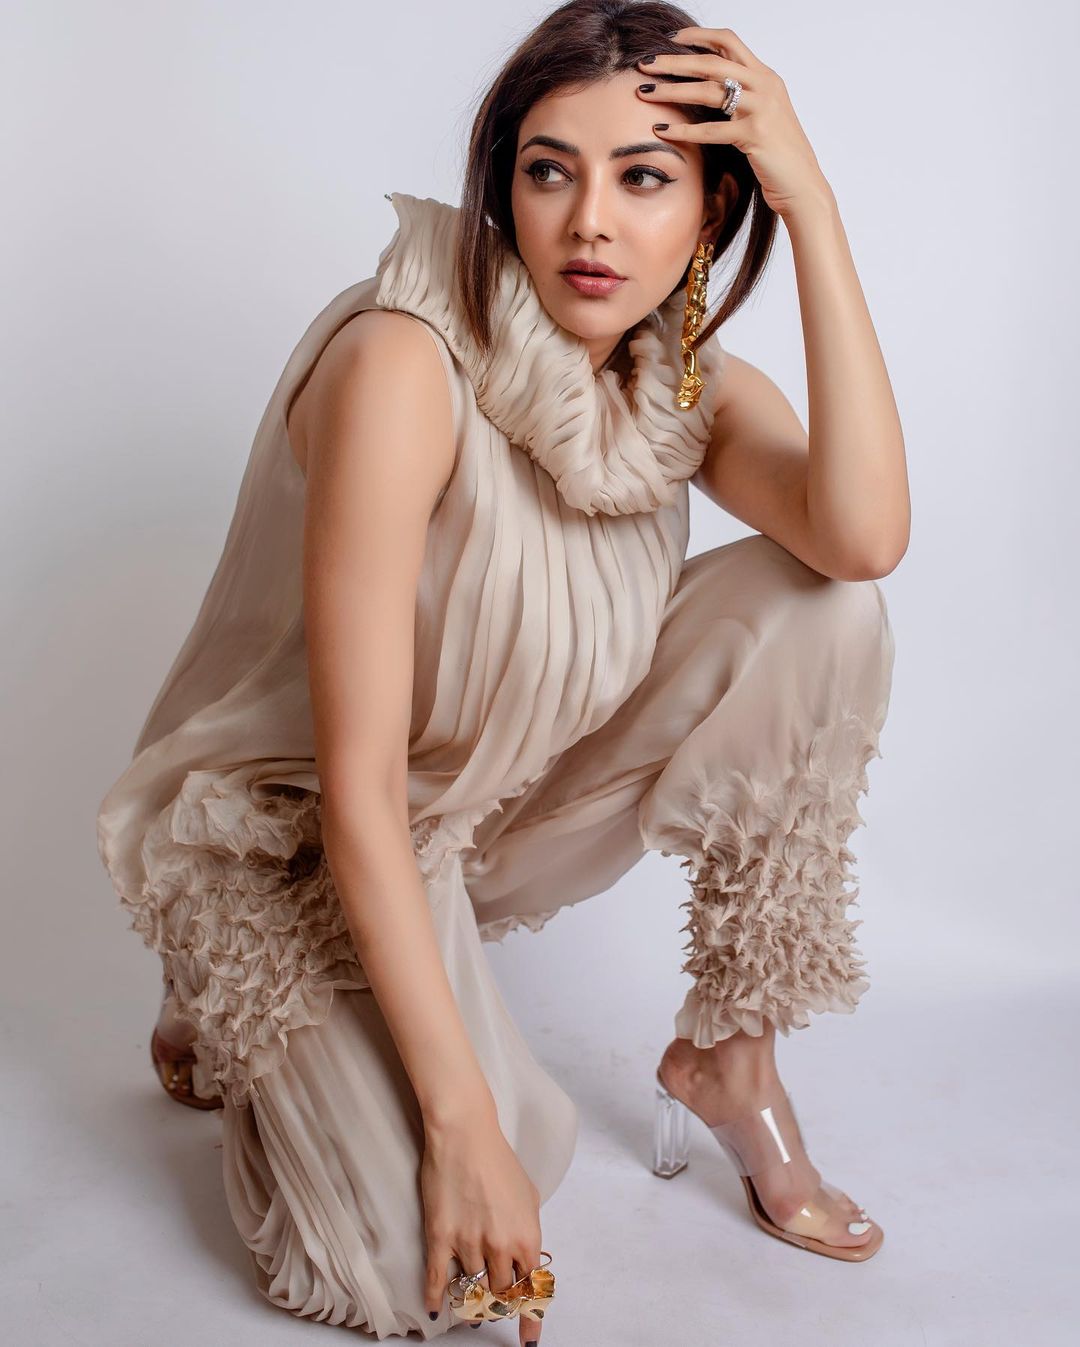 Kajal Aggarwal looks sultry in the nude ensemble.